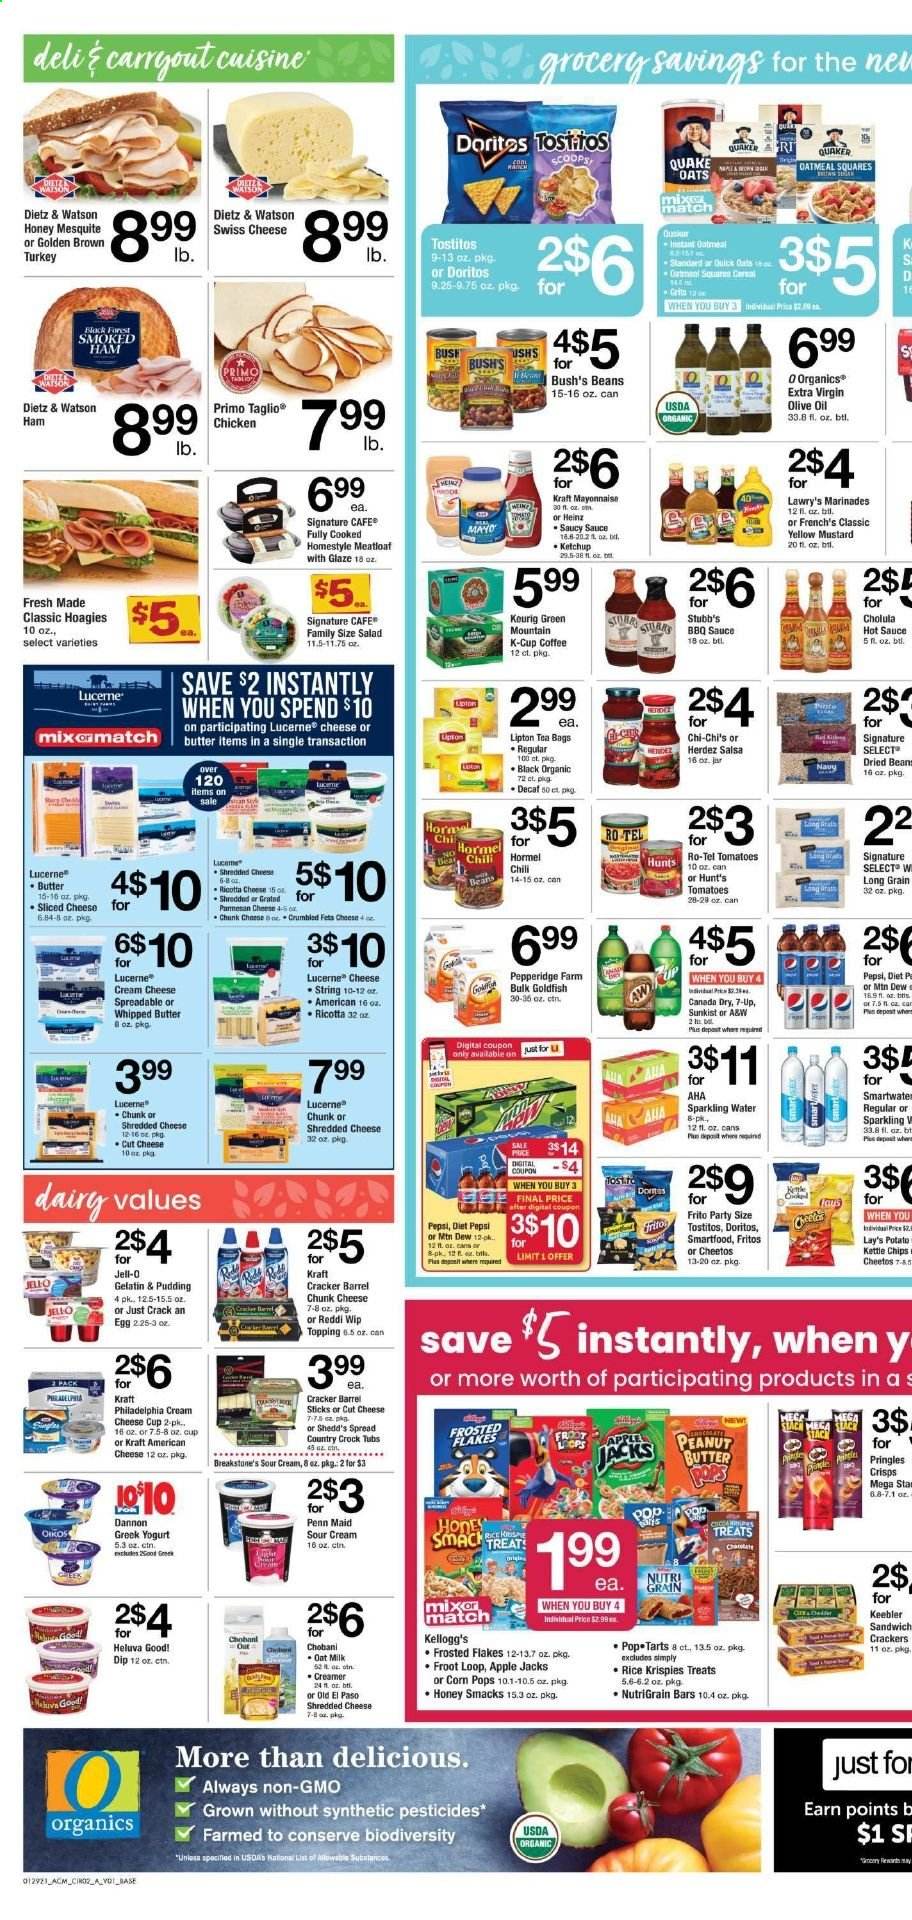 thumbnail - ACME Flyer - 01/29/2021 - 02/04/2021 - Sales products - Old El Paso, cream cheese, salad, sauce, meatloaf, Kraft®, Hormel, ham, smoked ham, Dietz & Watson, american cheese, ricotta, shredded cheese, sliced cheese, swiss cheese, Philadelphia, cheese cup, feta, chunk cheese, greek yoghurt, pudding, yoghurt, Oikos, Chobani, Dannon, milk, oat milk, whipped butter, sour cream, creamer, mayonnaise, salsa, dip, beans, crackers, Kellogg's, Keebler, Doritos, Pringles, Cheetos, chips, Lay’s, Smartfood, Goldfish, Tostitos, oatmeal, oats, topping, Jell-O, Heinz, cereals, Fritos, Rice Krispies, Quick Oats, Frosted Flakes, Corn Pops, Nutri-Grain, BBQ sauce, mustard, hot sauce, extra virgin olive oil, olive oil, honey, peanut butter, Canada Dry, Mountain Dew, Pepsi, Lipton, Diet Pepsi, 7UP, A&W, sparkling water, tea bags, coffee, coffee capsules, K-Cups, Keurig, Green Mountain, pan, gelatin. Page 2.